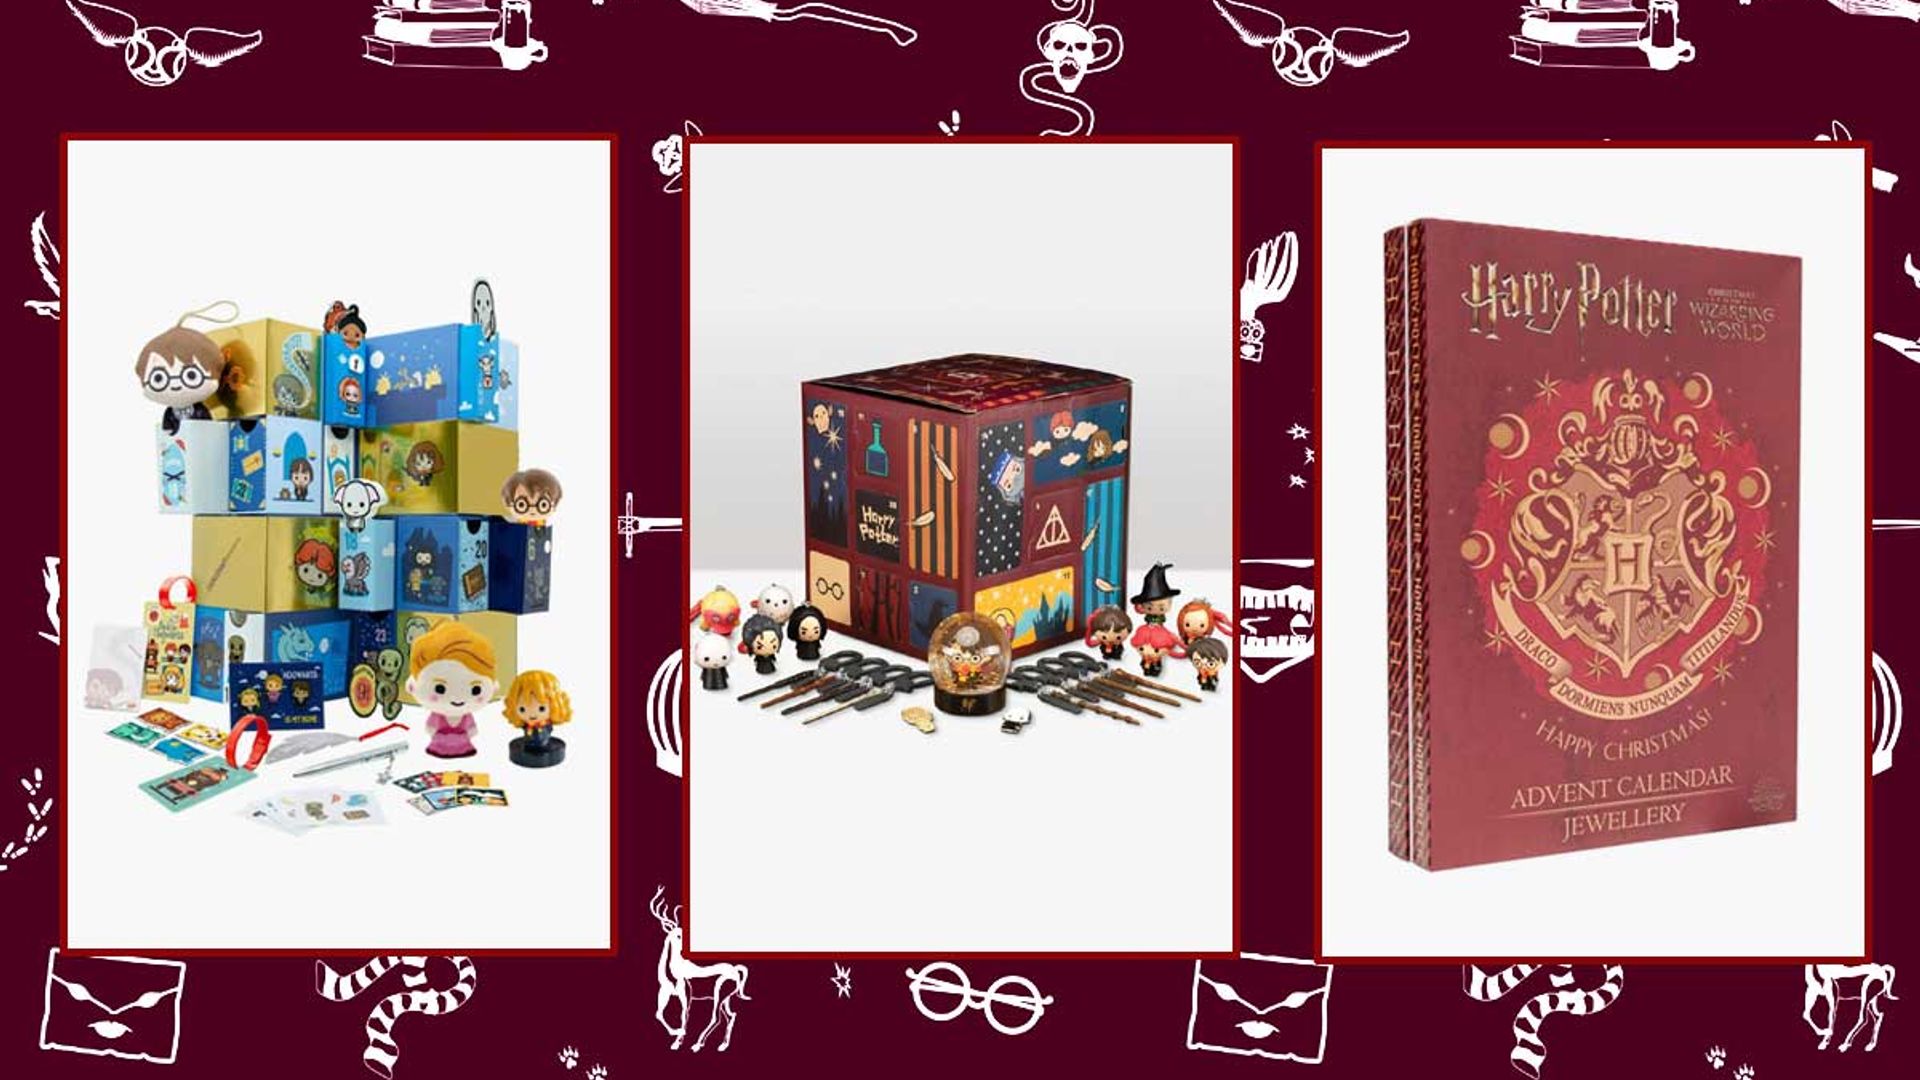 Last chance to get Primark's rare Harry Potter advent calendar - plus more options for boy wizard fans